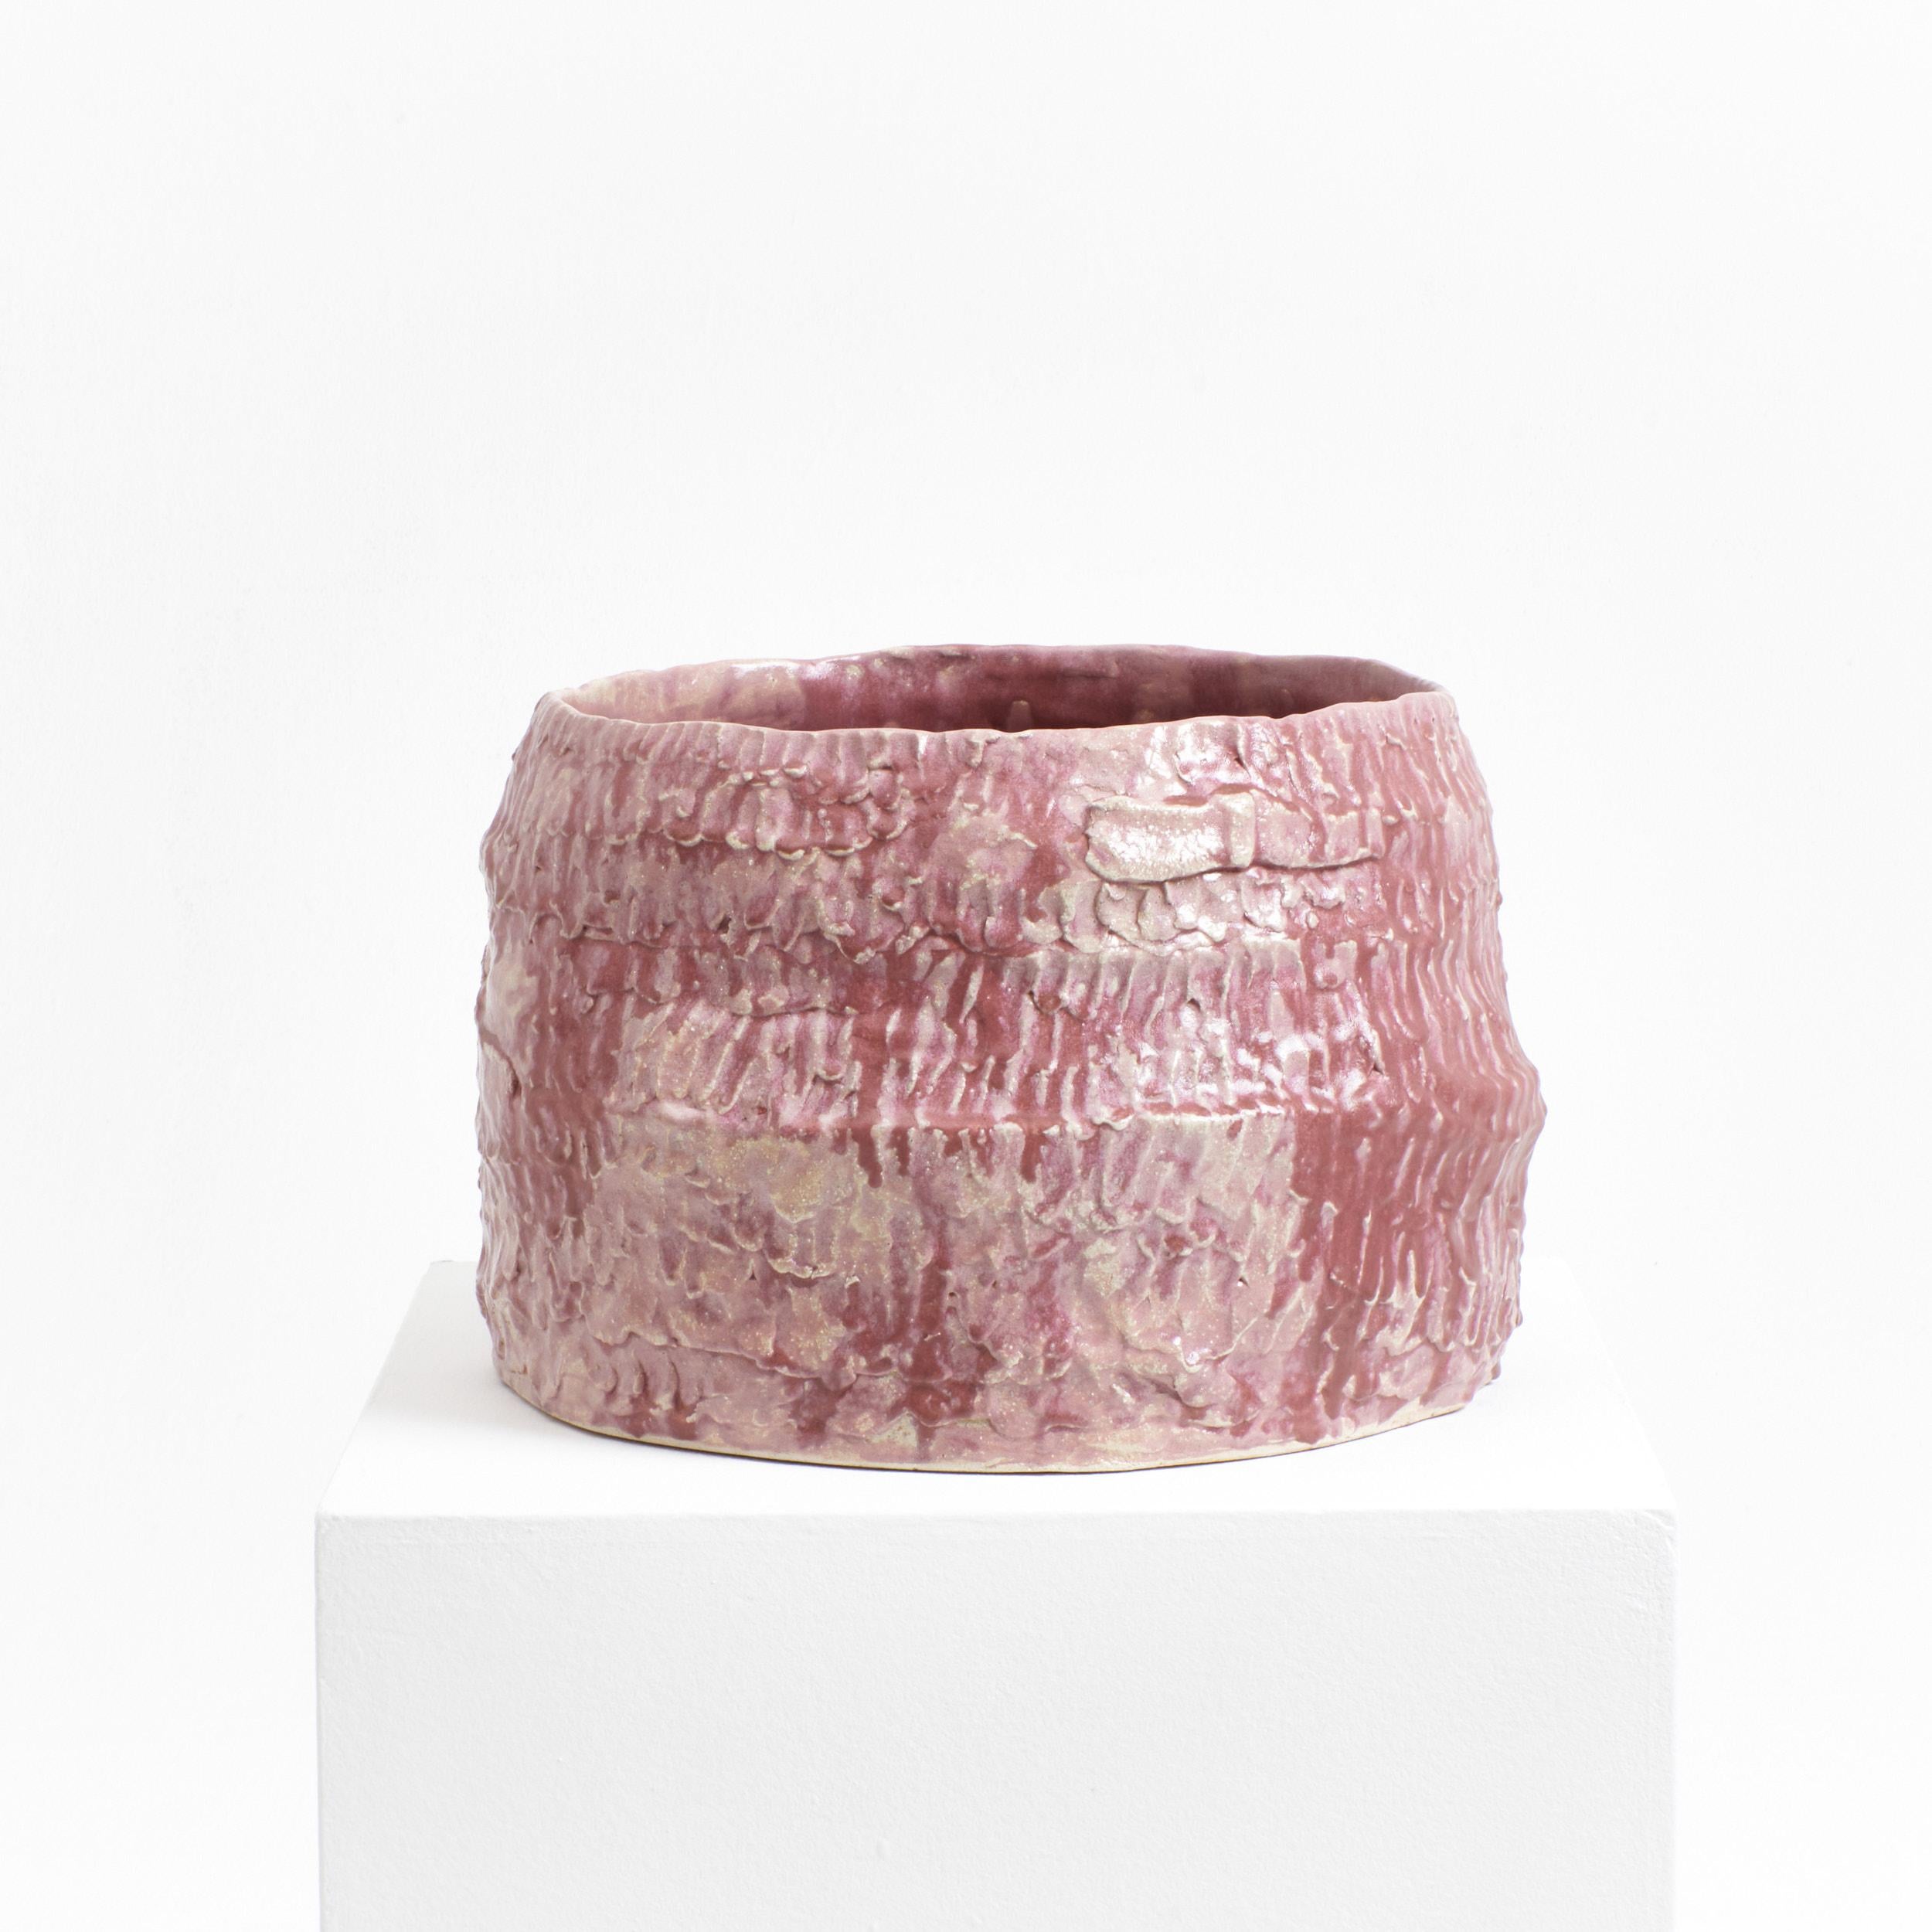 Casa Planter No 2 in Dripped Dark Pink
Designed by Project 213A in 2023

Artisanal planter created by skilled artisans in Project 213A's own workshop. Hand-sculpted ceramic with textured finish in dripped dark pink glaze.
Each piece is unique due to